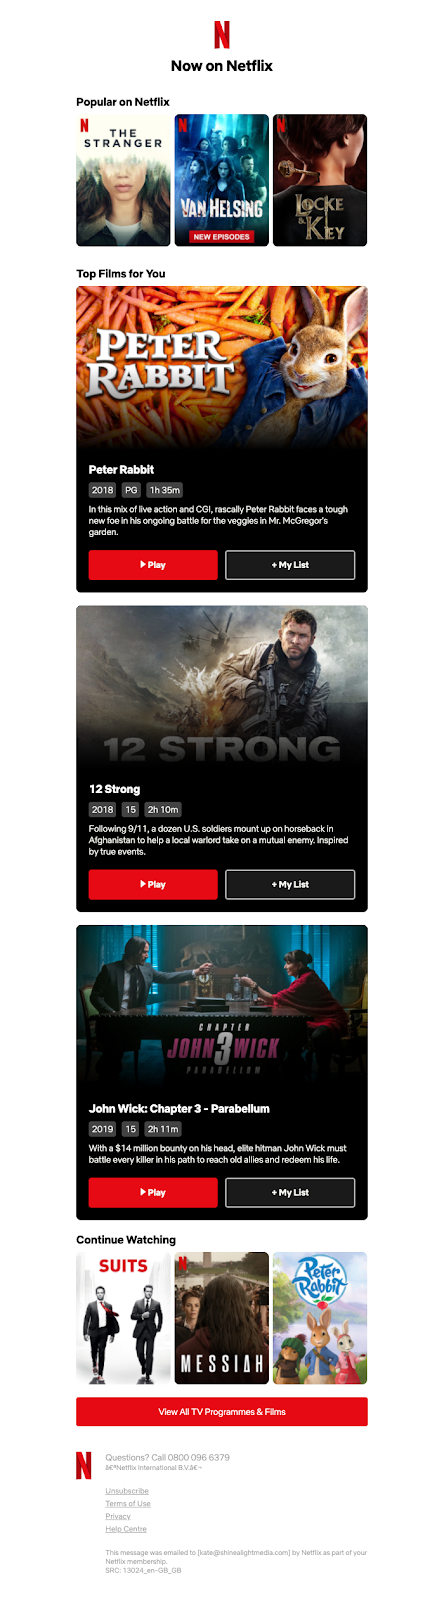 Netflix's product recommendation email template 